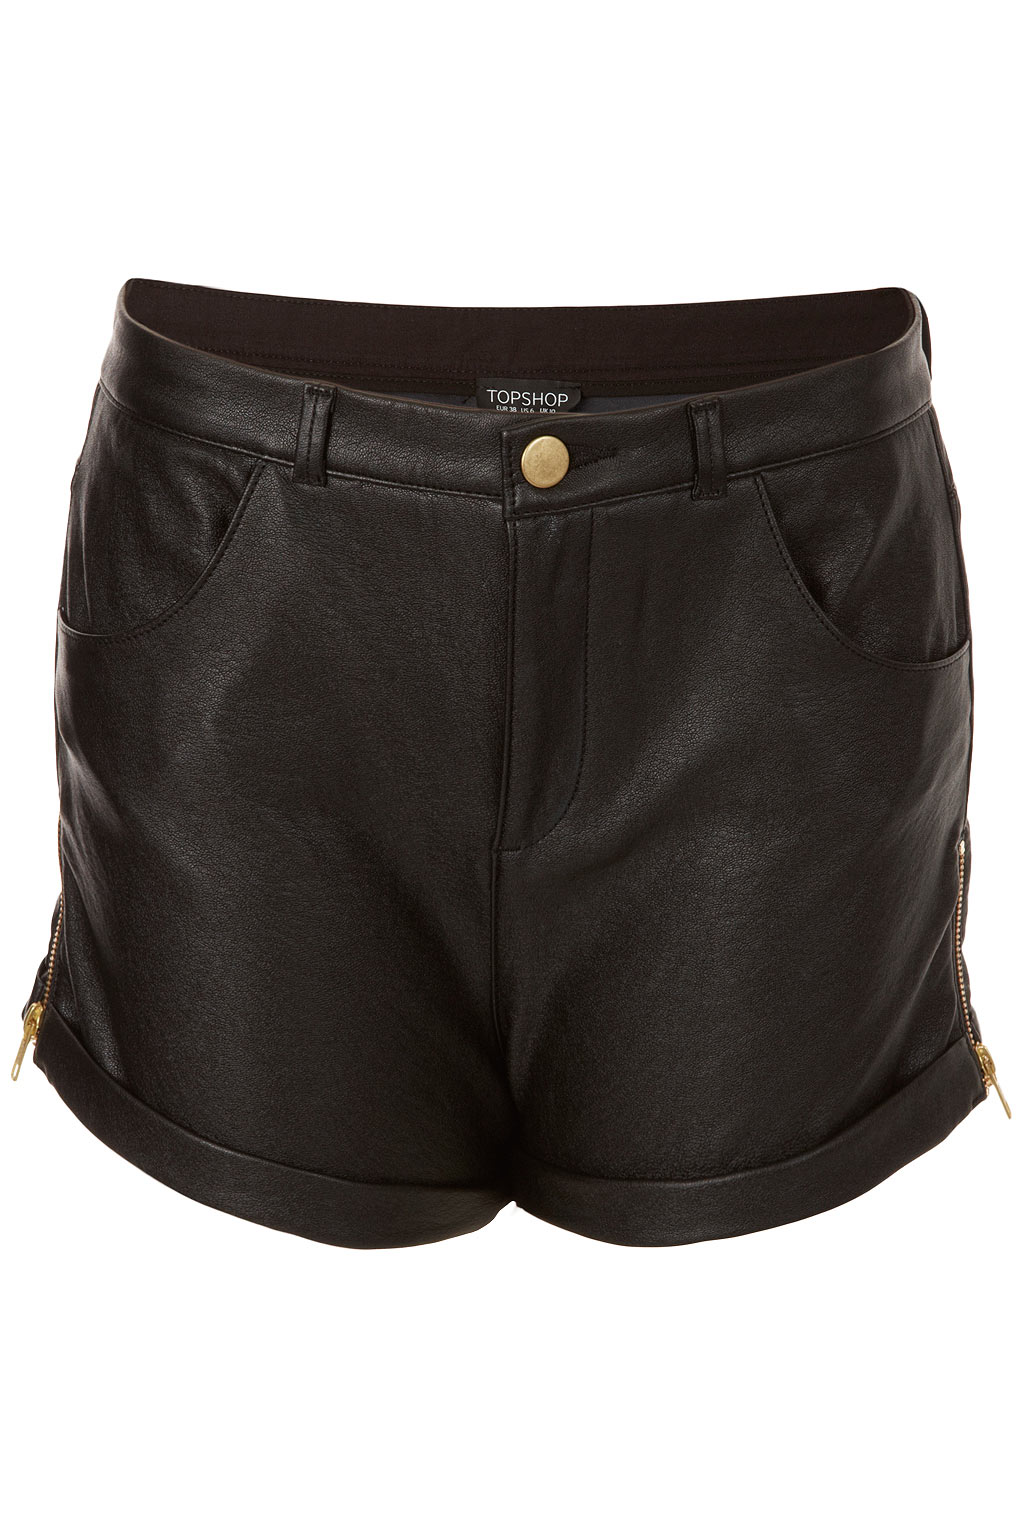 Lyst - Topshop Zip Side Leather Look Shorts in Black